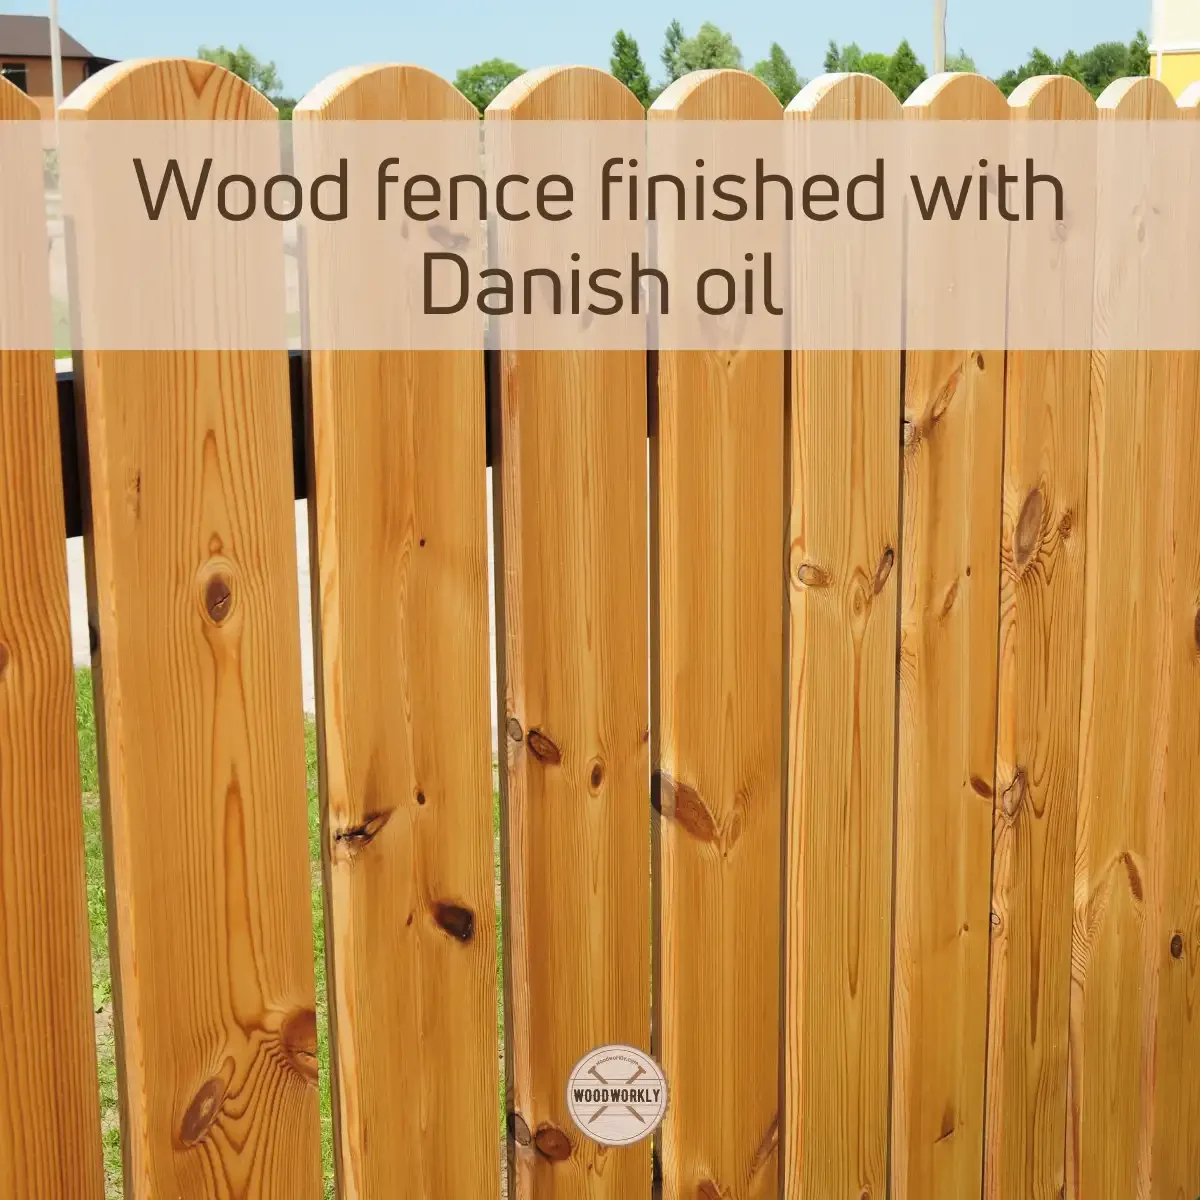 Wood fence finished with Danish oil